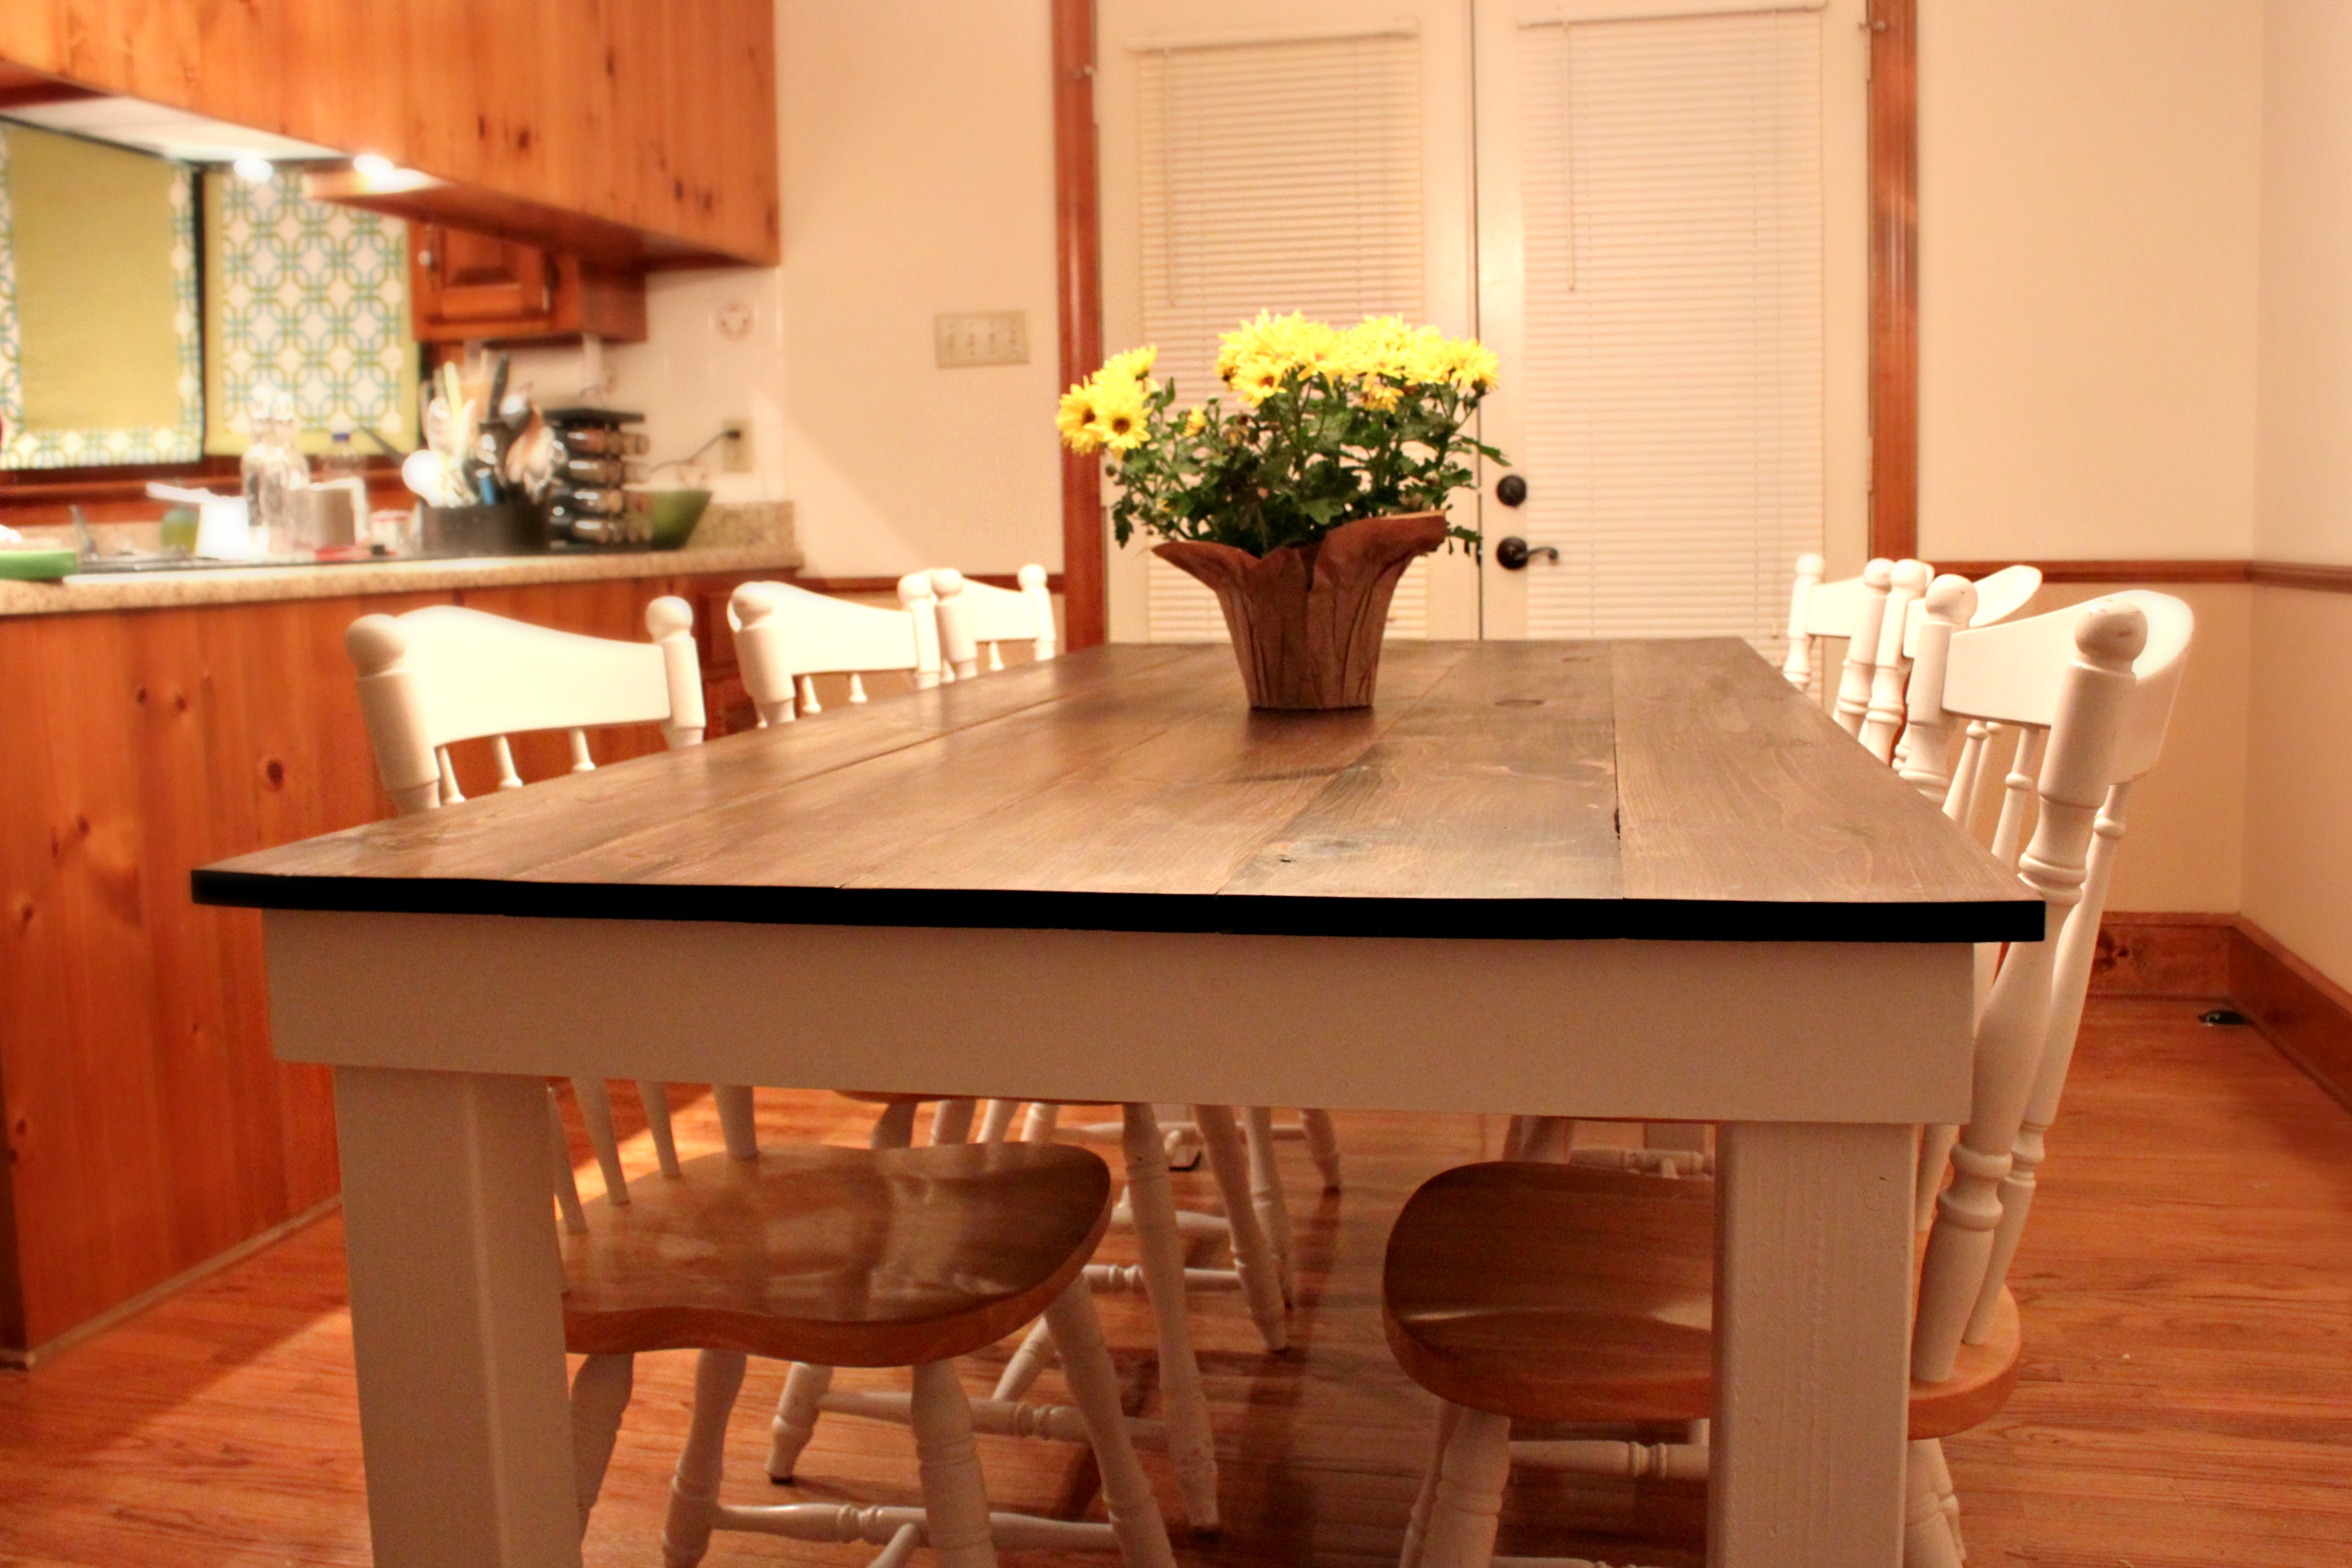 A Kitchen Table Fresh In Amazing Table1 | Home Design